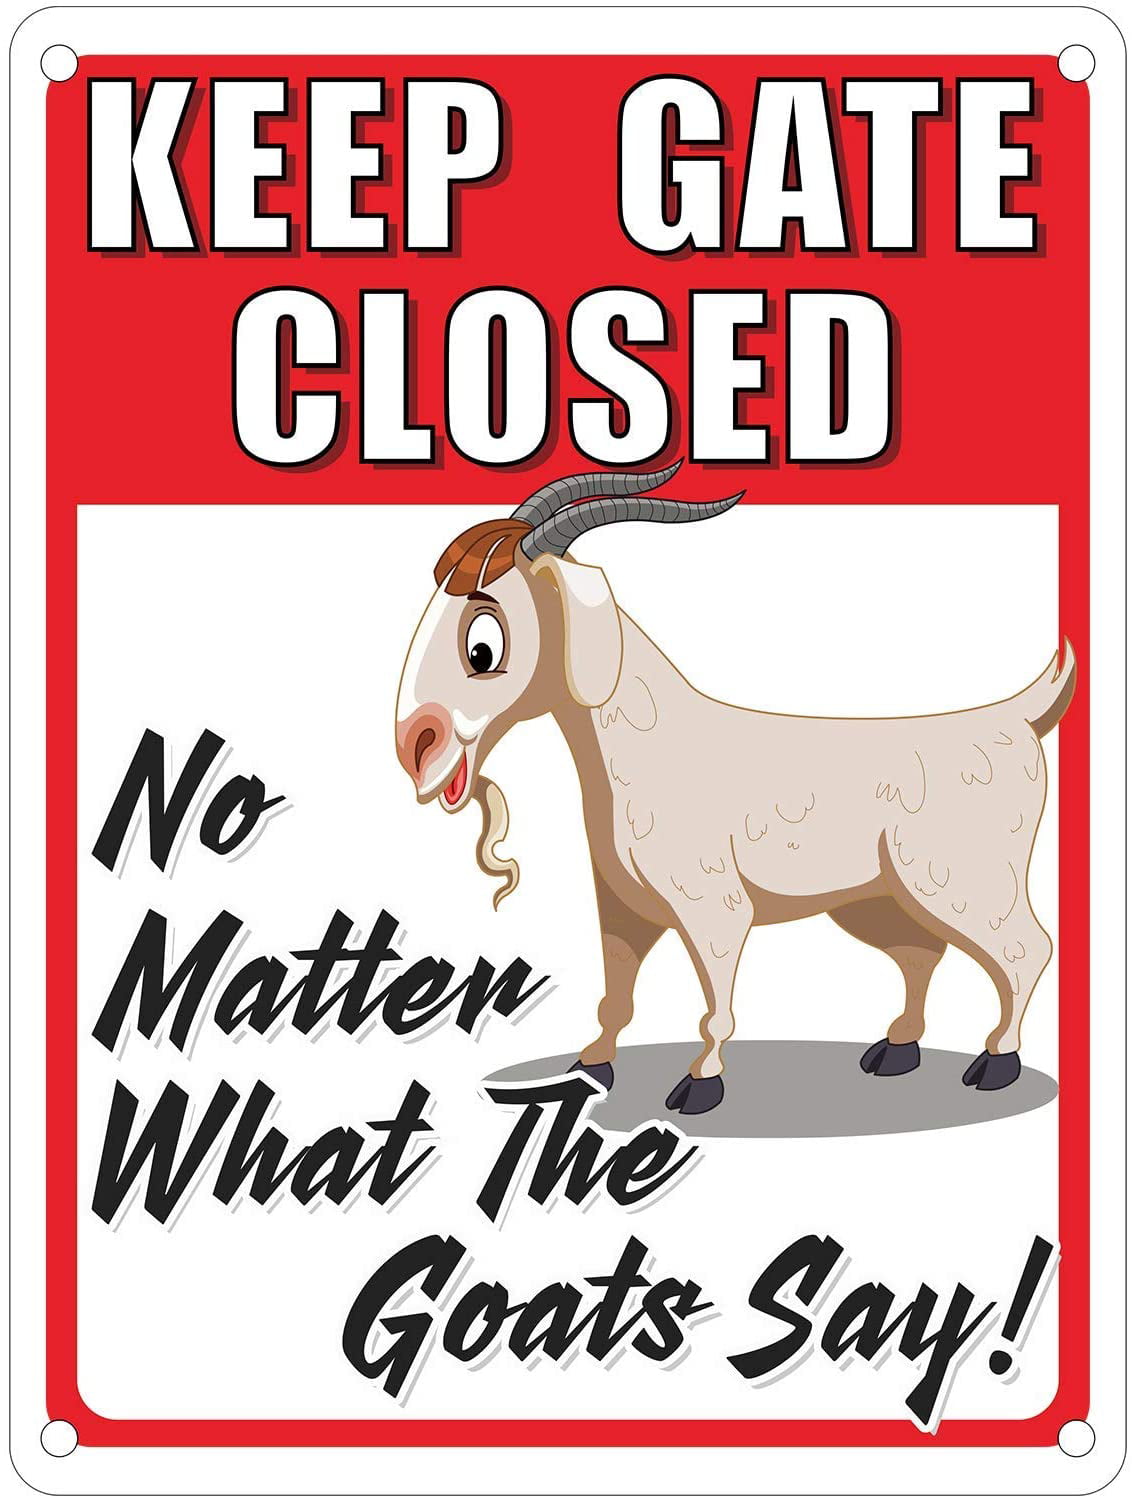 Warning Metal Tin Sign Goats Outdoor Funny Novelty Caution Goats Farm House Barn Sign for Fence Wall Gate 8x12INCH… Keep The Gate Closed No Matter What The Goats Say